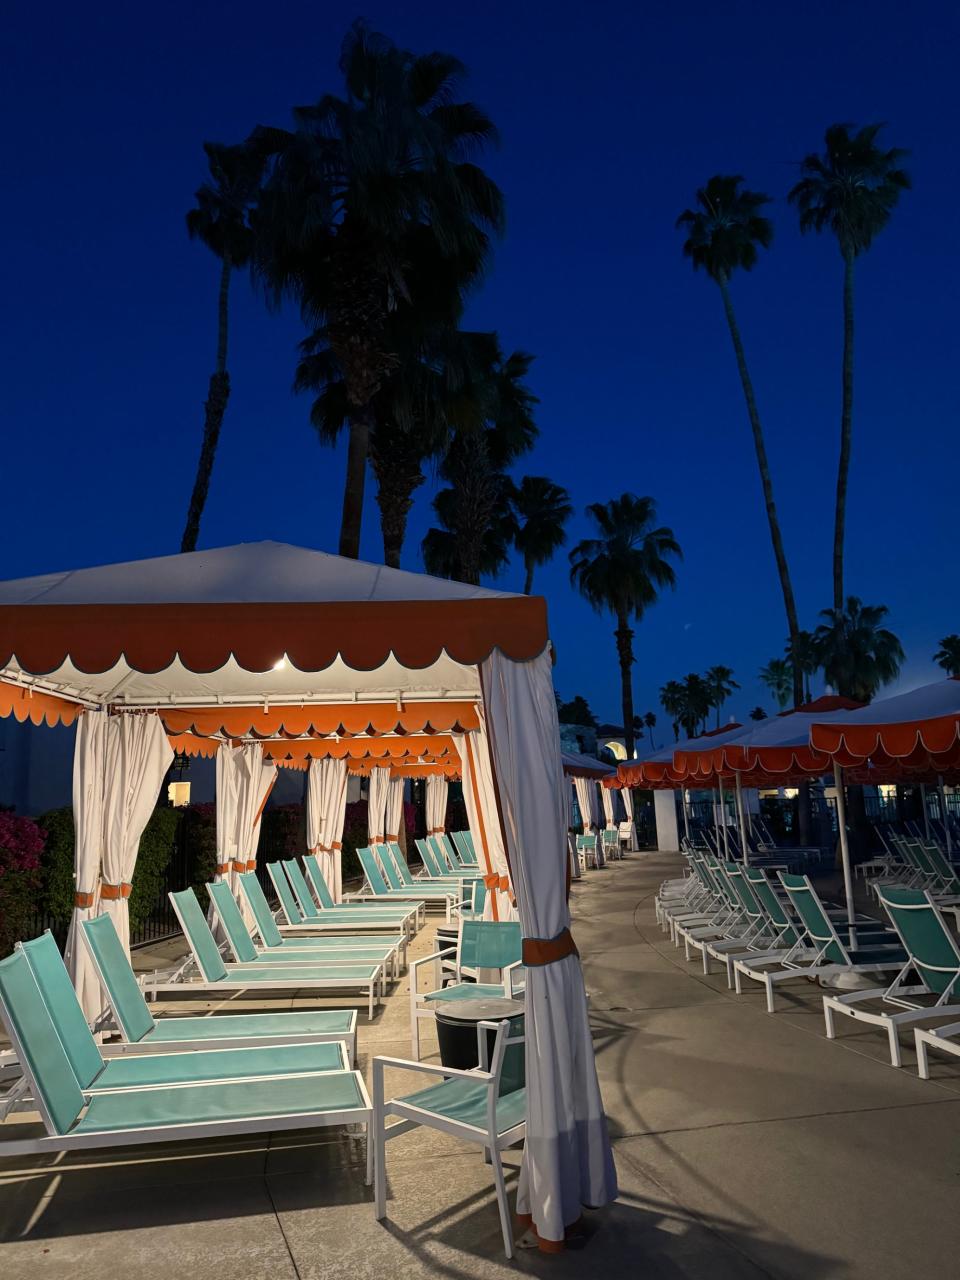 Poolside loungers and cabanas at a resort during twilight with palm trees in the background